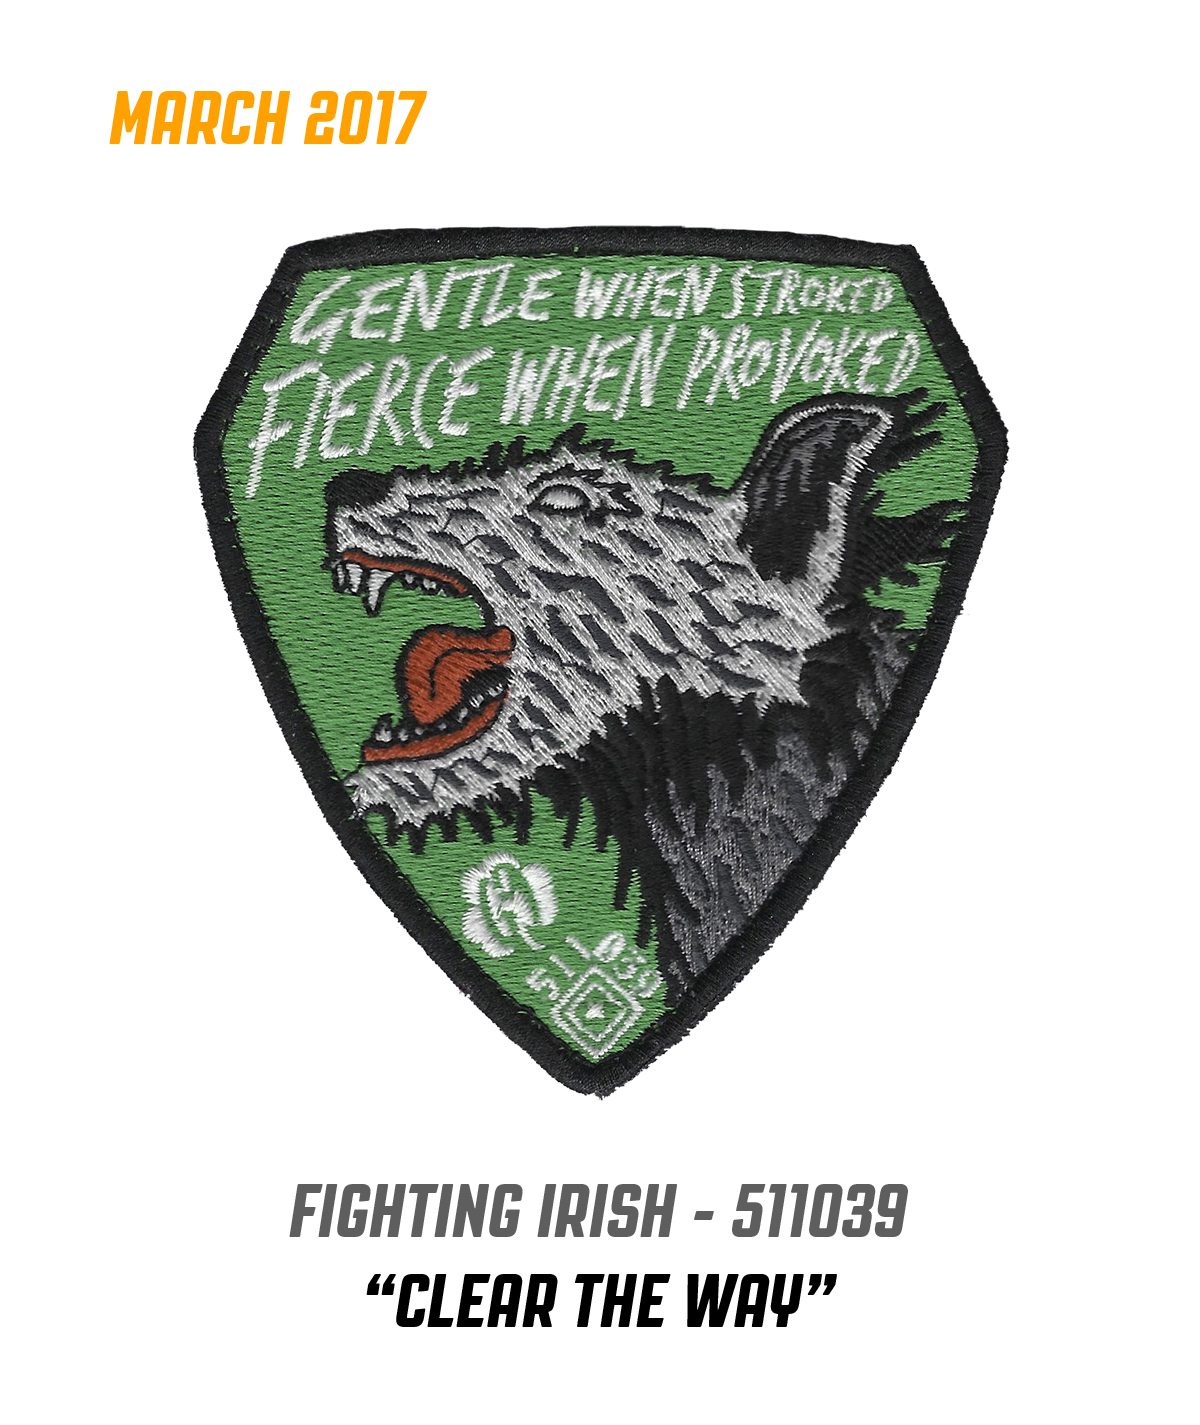 5.11 Tactical - March 2017 Patch Of The Month - 511039, Uniform Patches